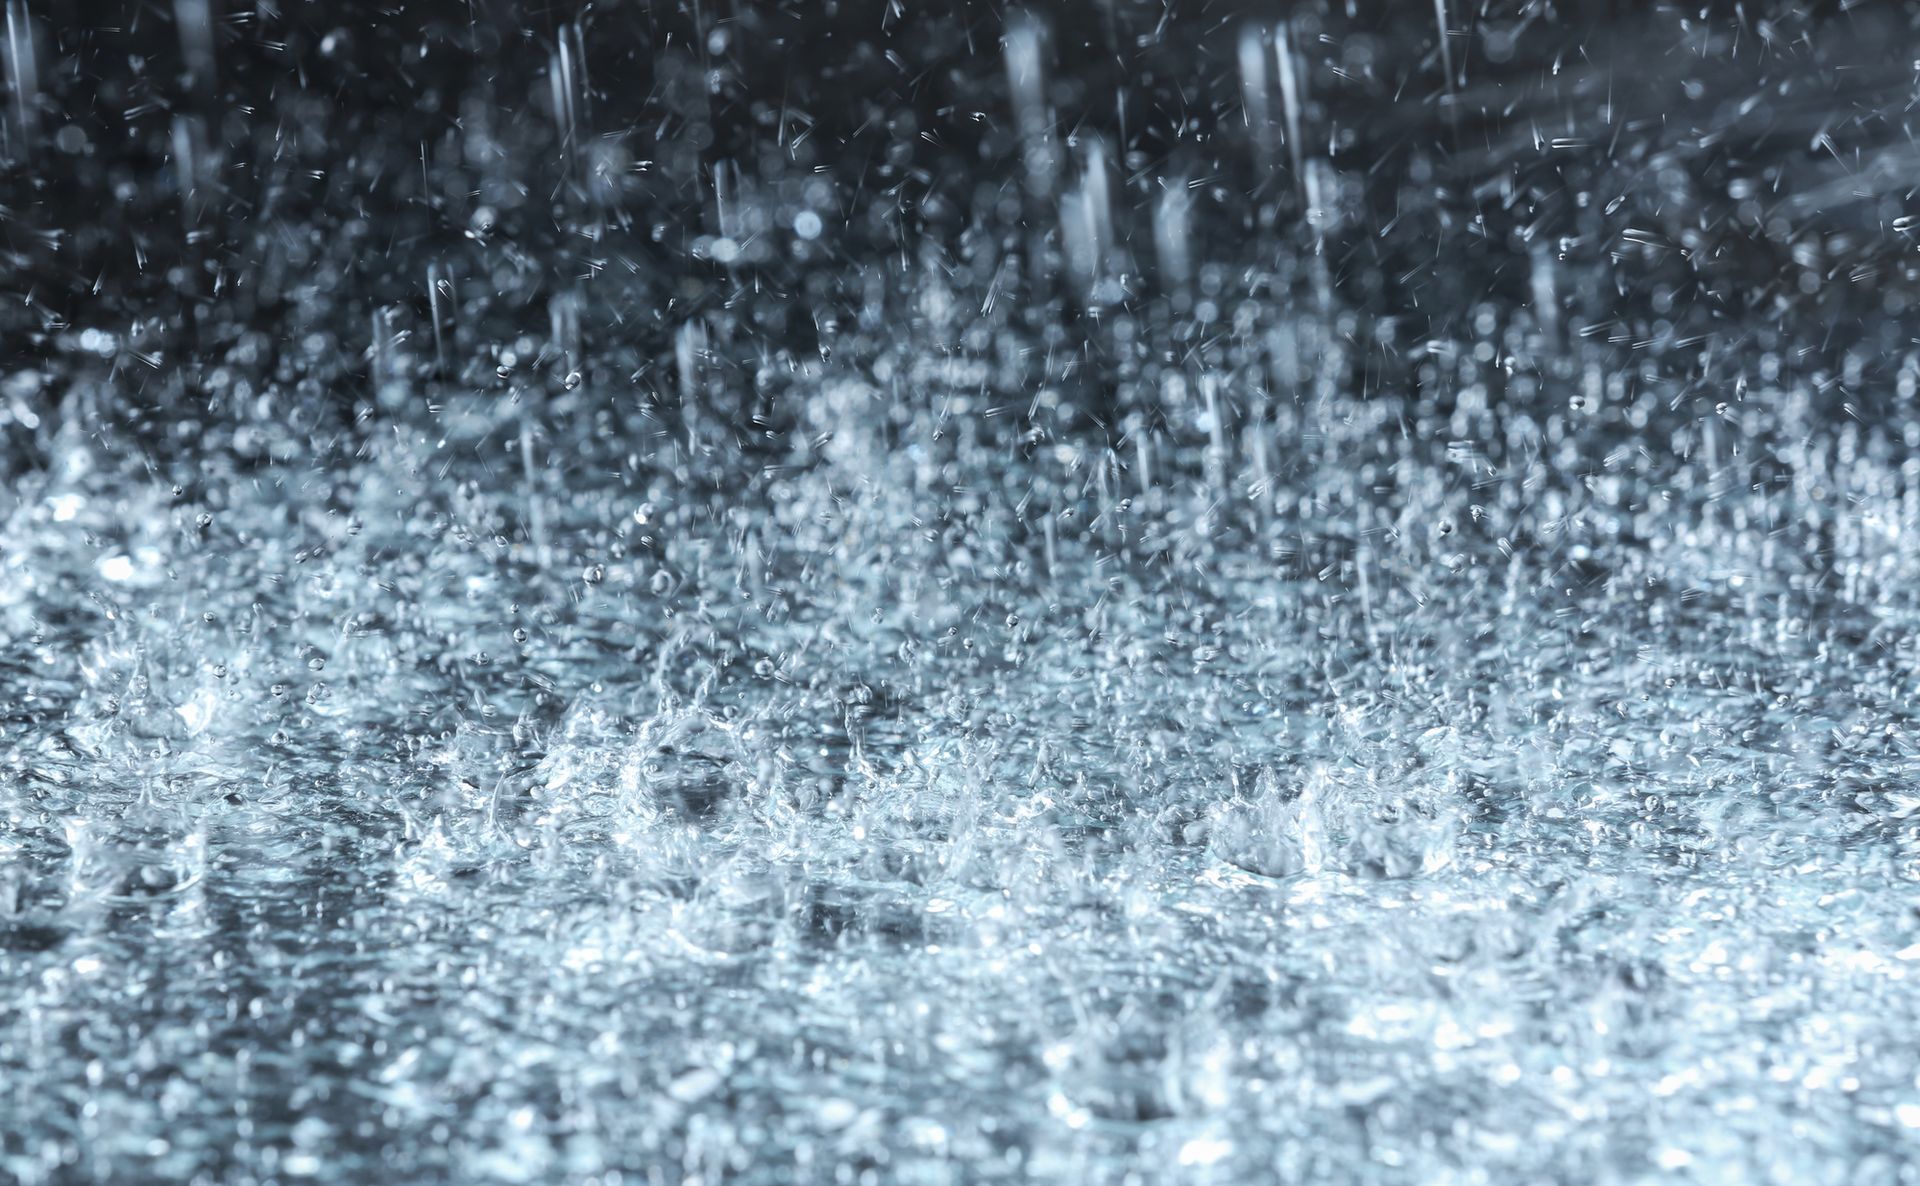 Spring Showers and Beyond: Common Causes of Water Damage This Season